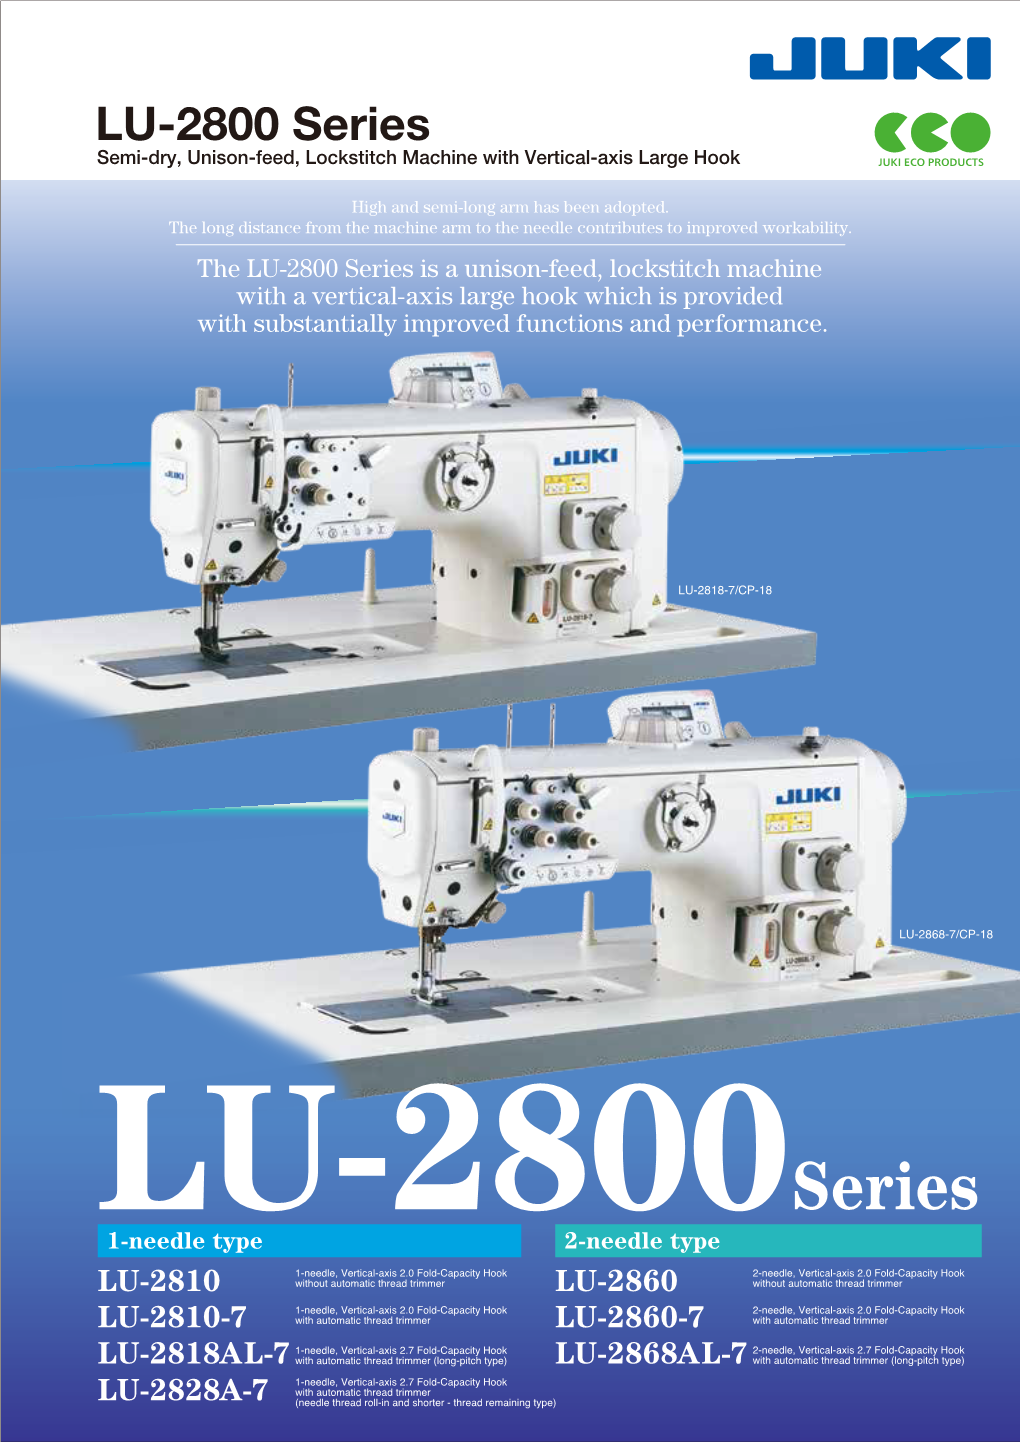 LU-2800 Series Semi-Dry, Unison-Feed, Lockstitch Machine with Vertical-Axis Large Hook